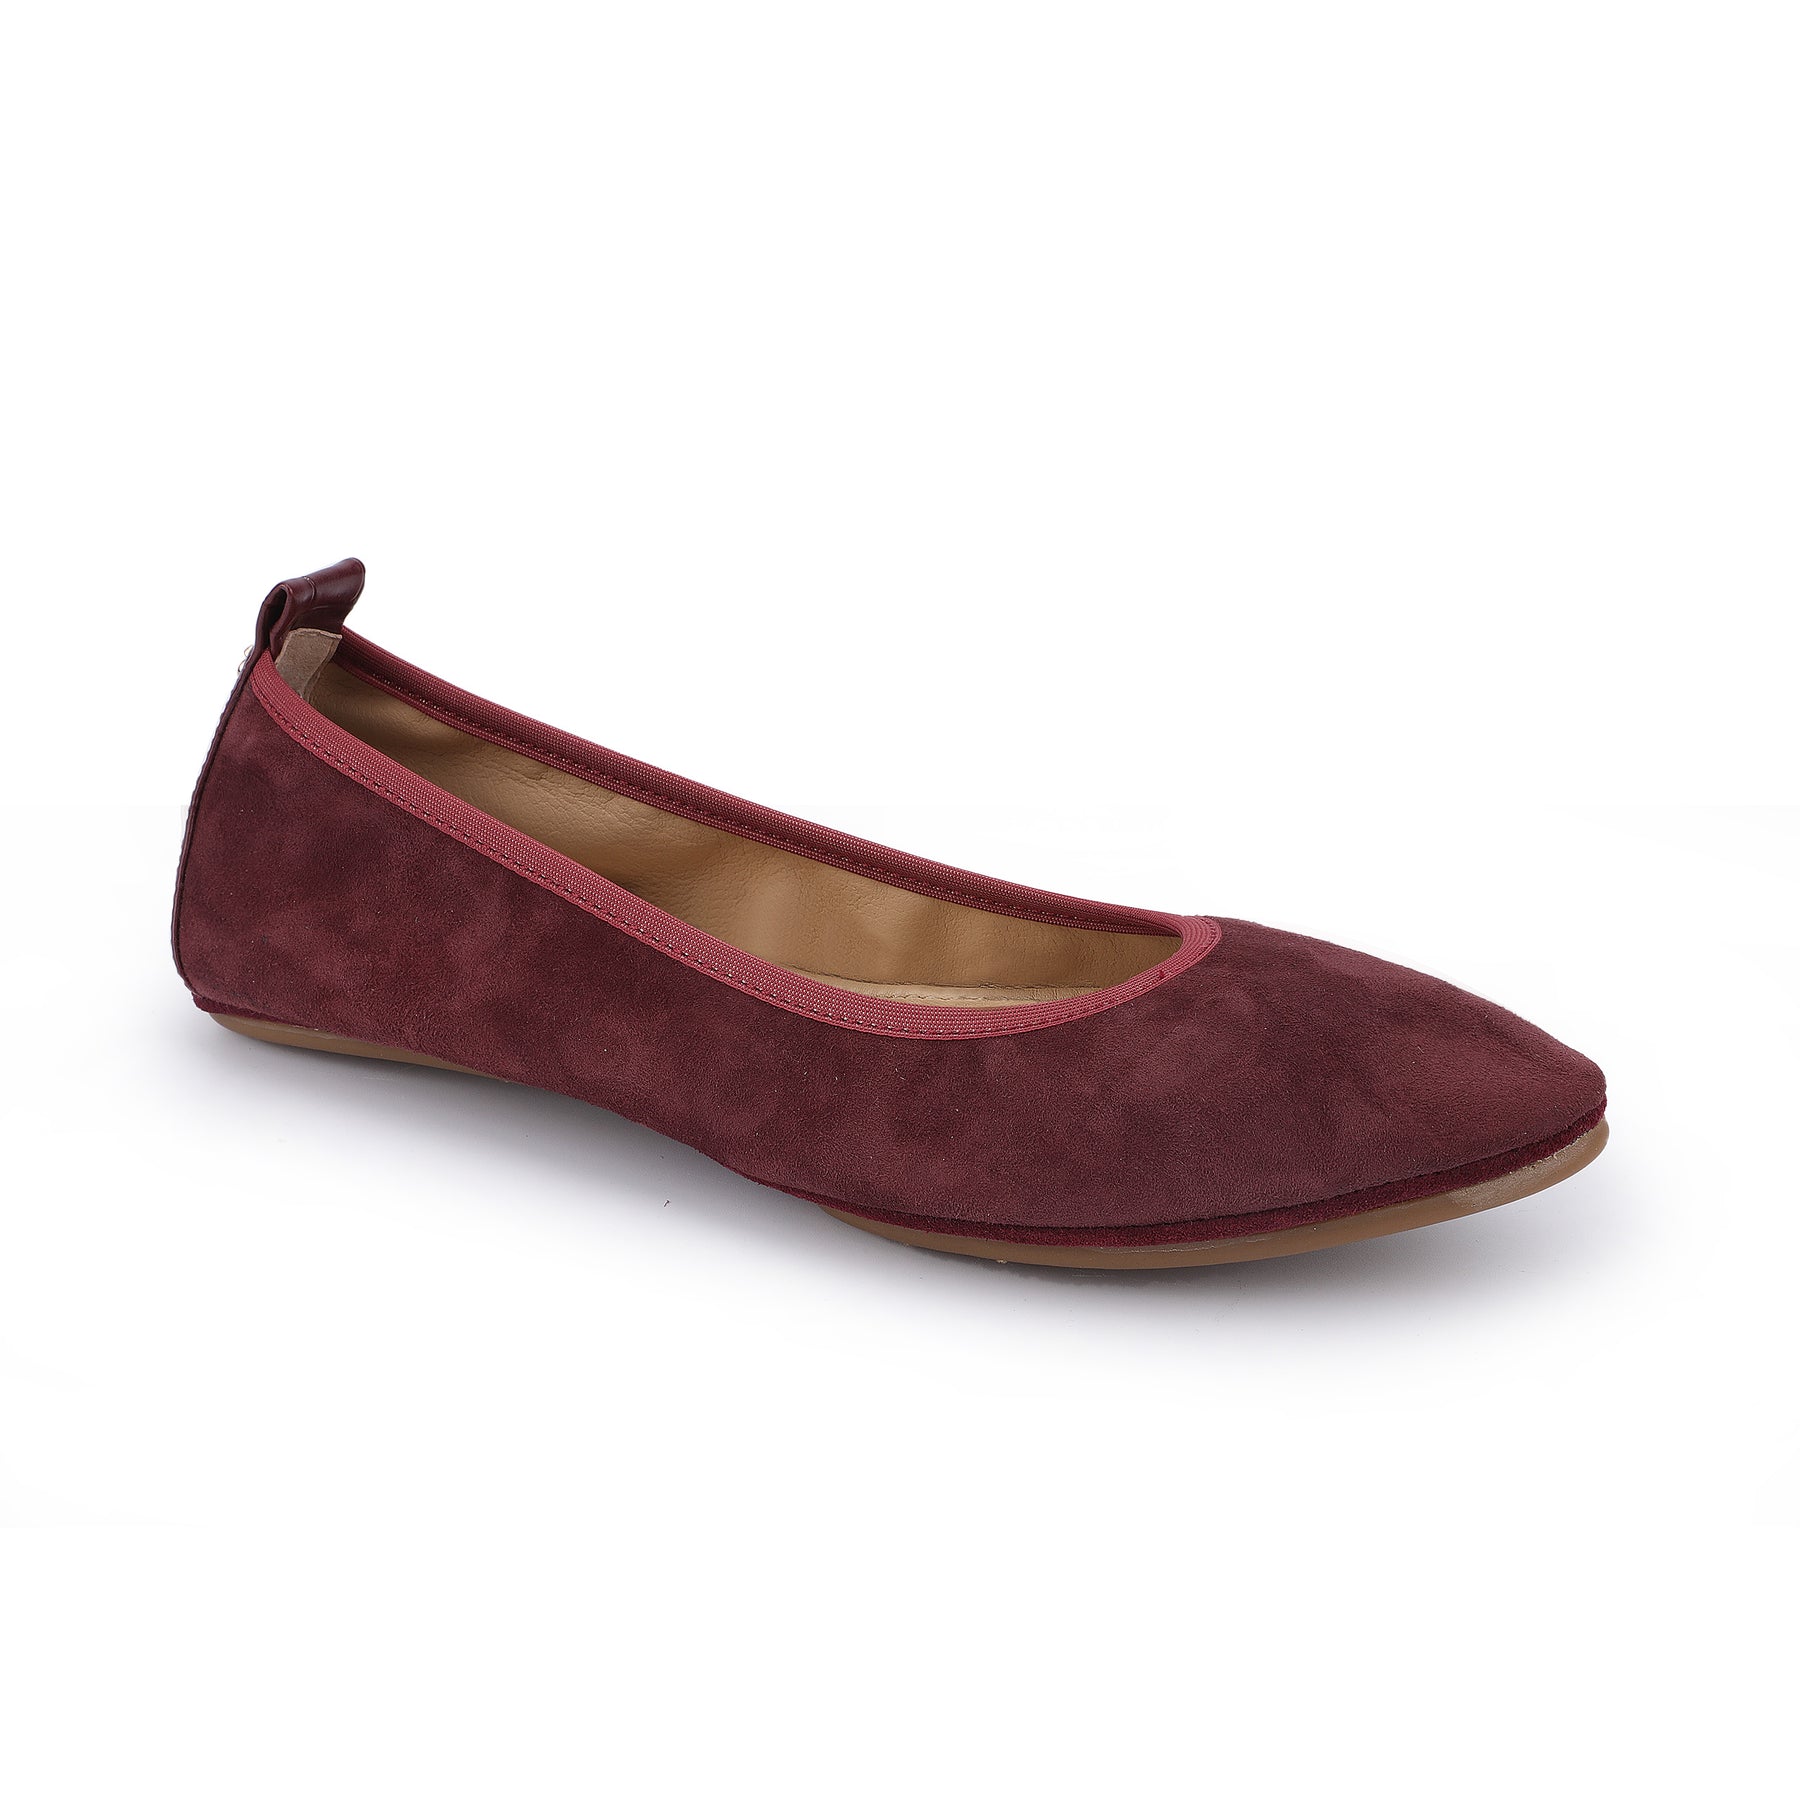 Vienna Pointed Toe Foldable Ballet Flat in Amarena Suede